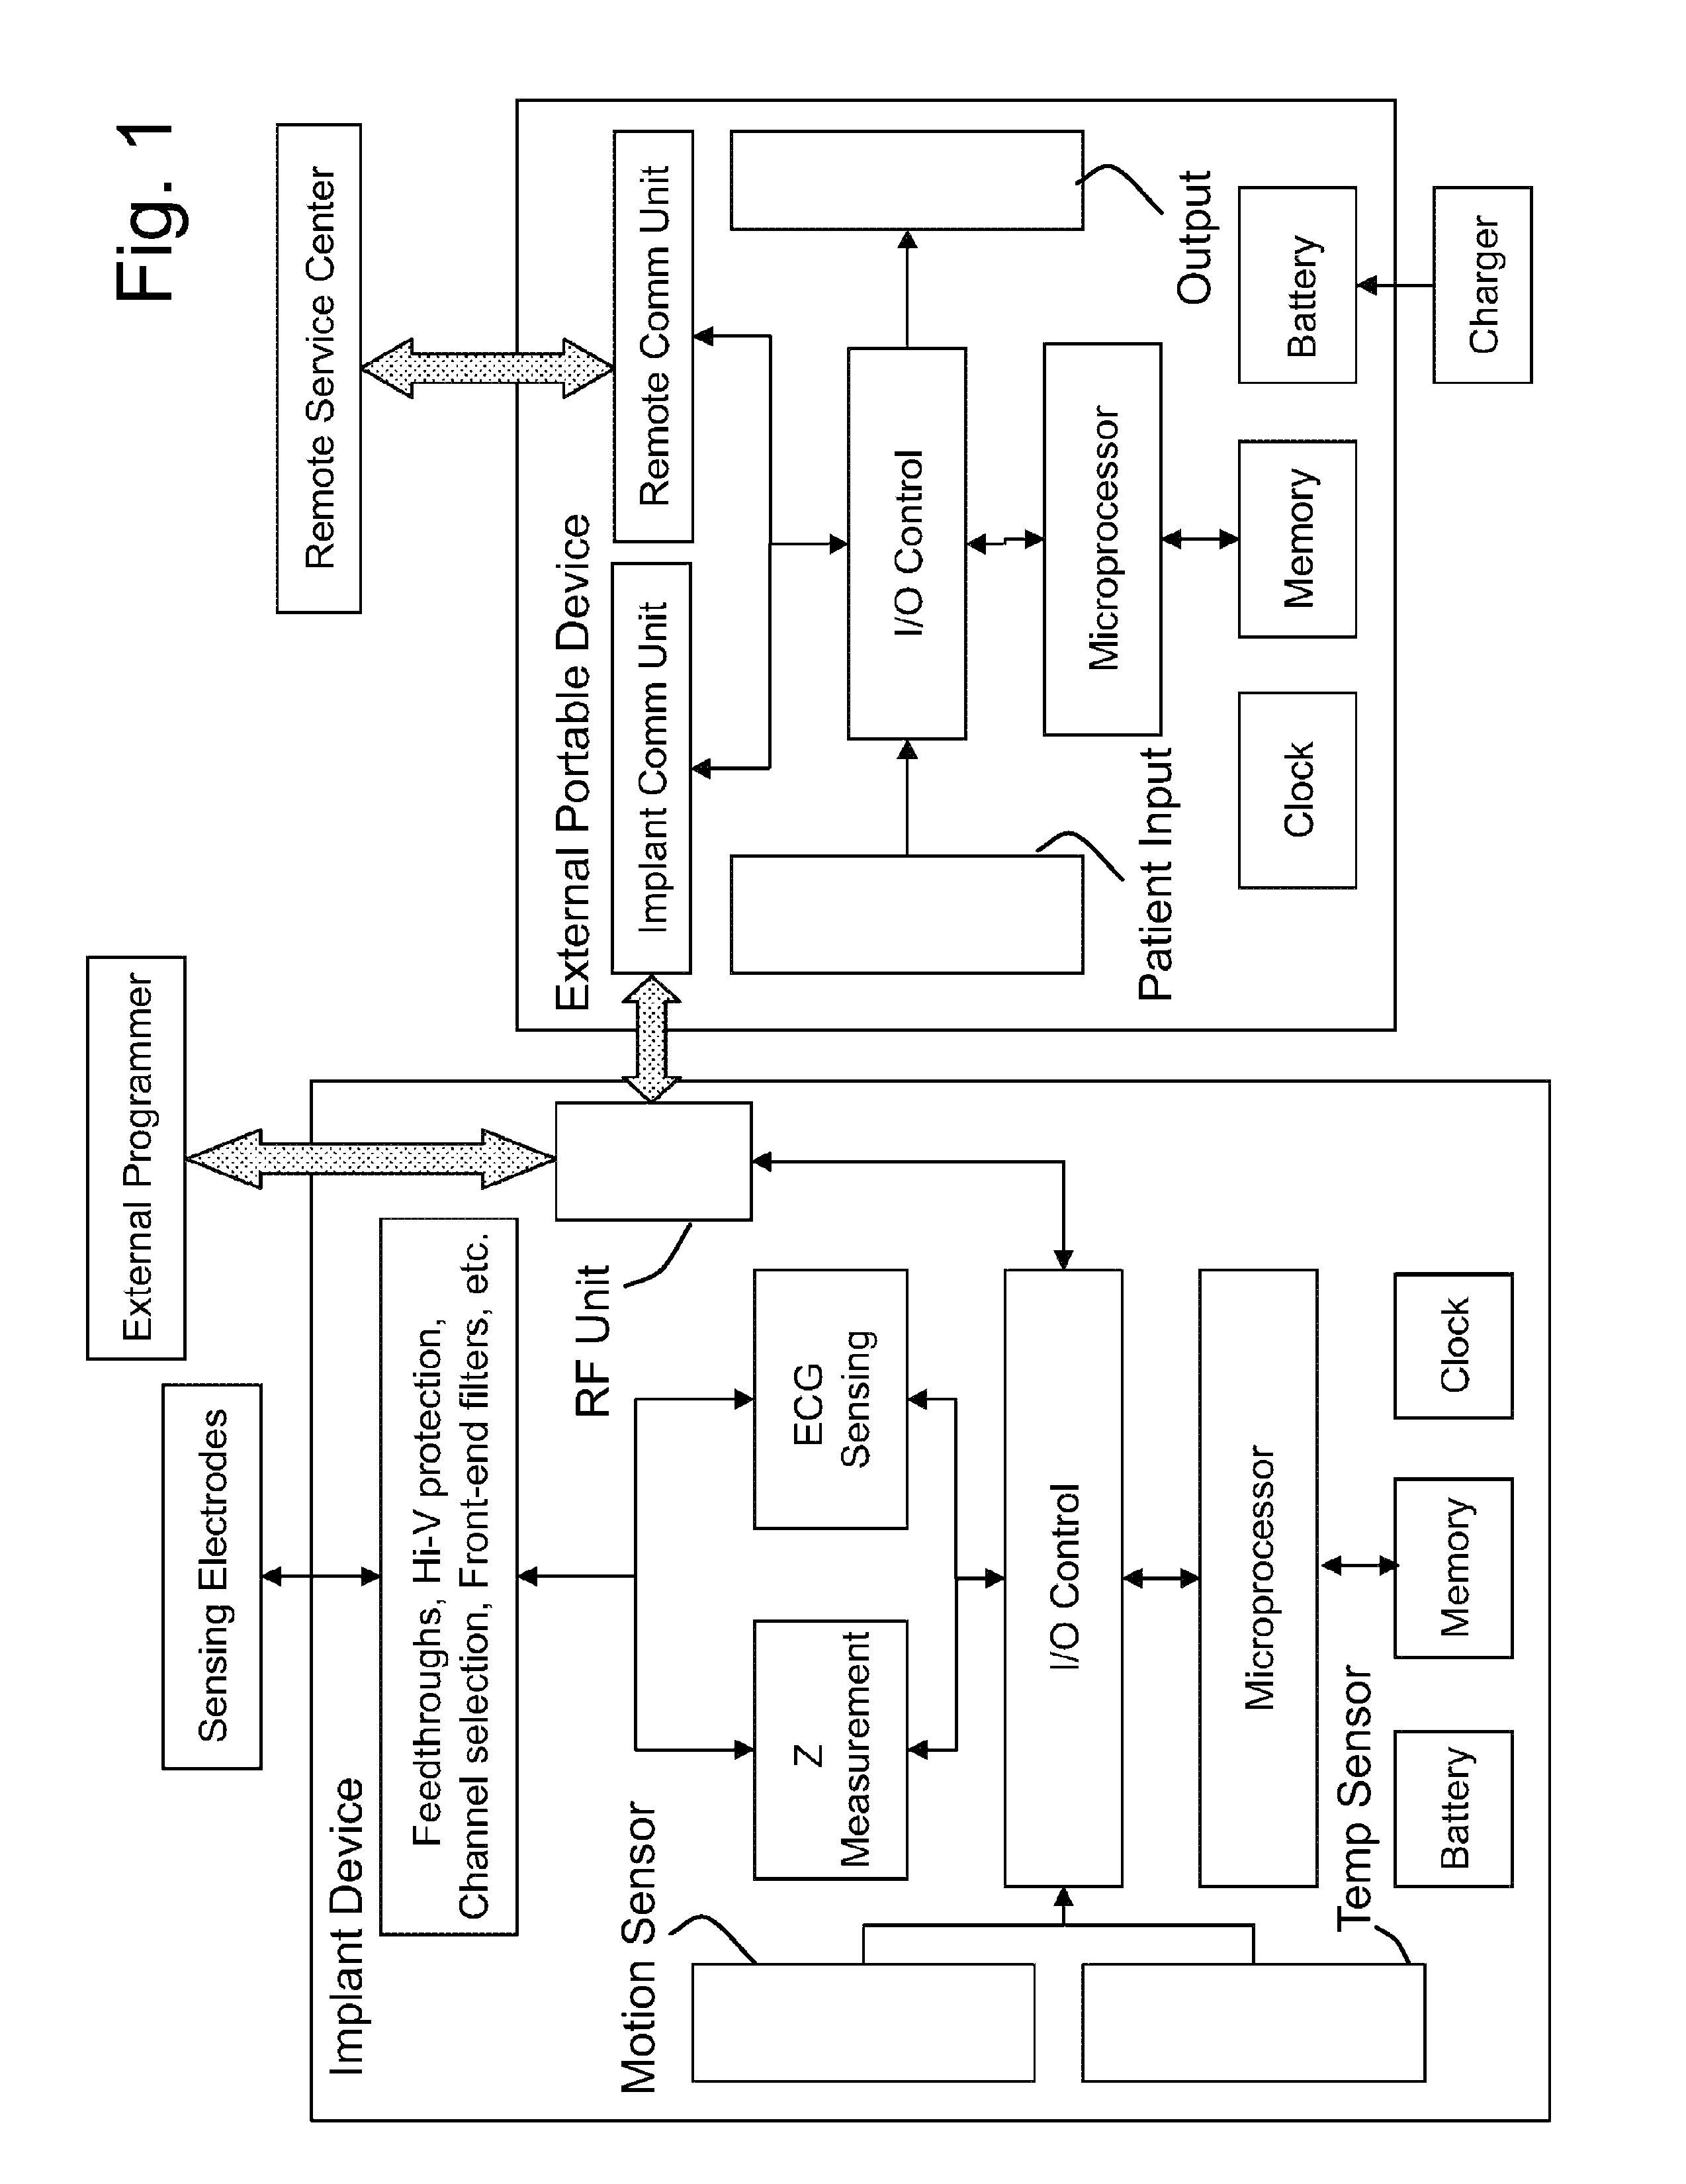 Heart monitoring device and method